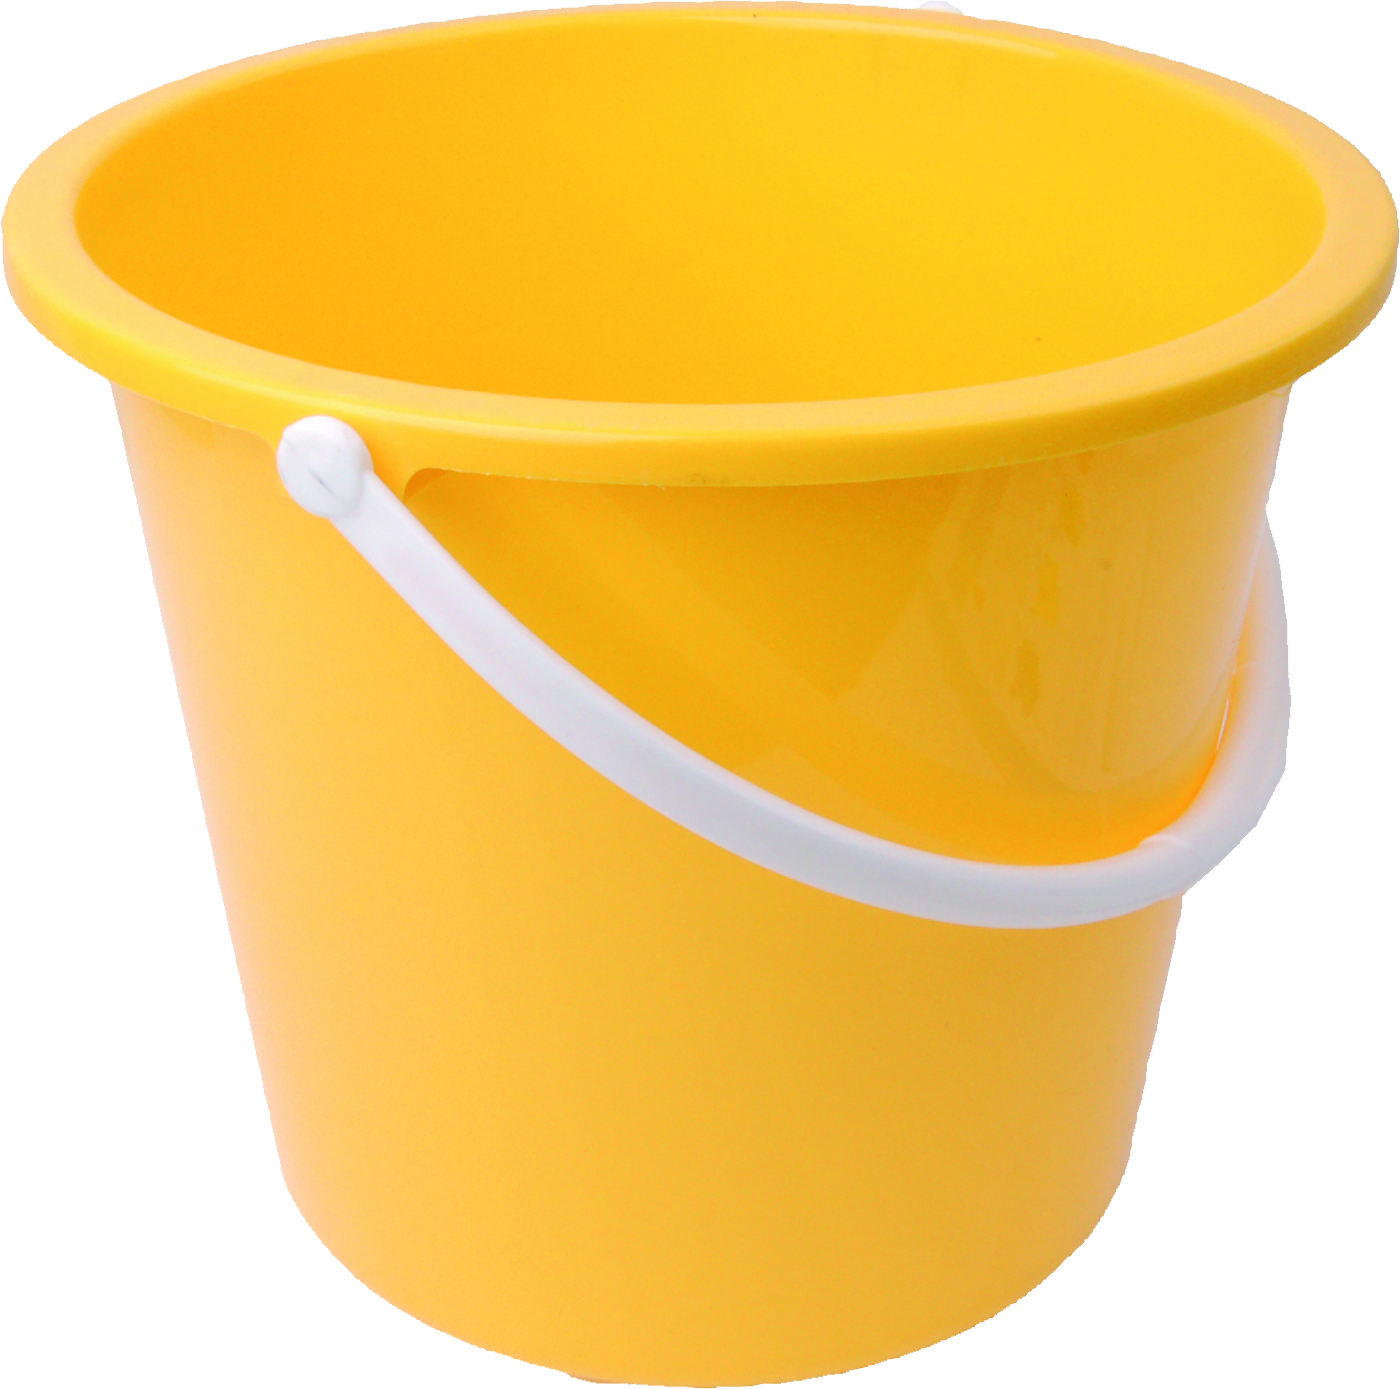 Plastic red bucket PNG image